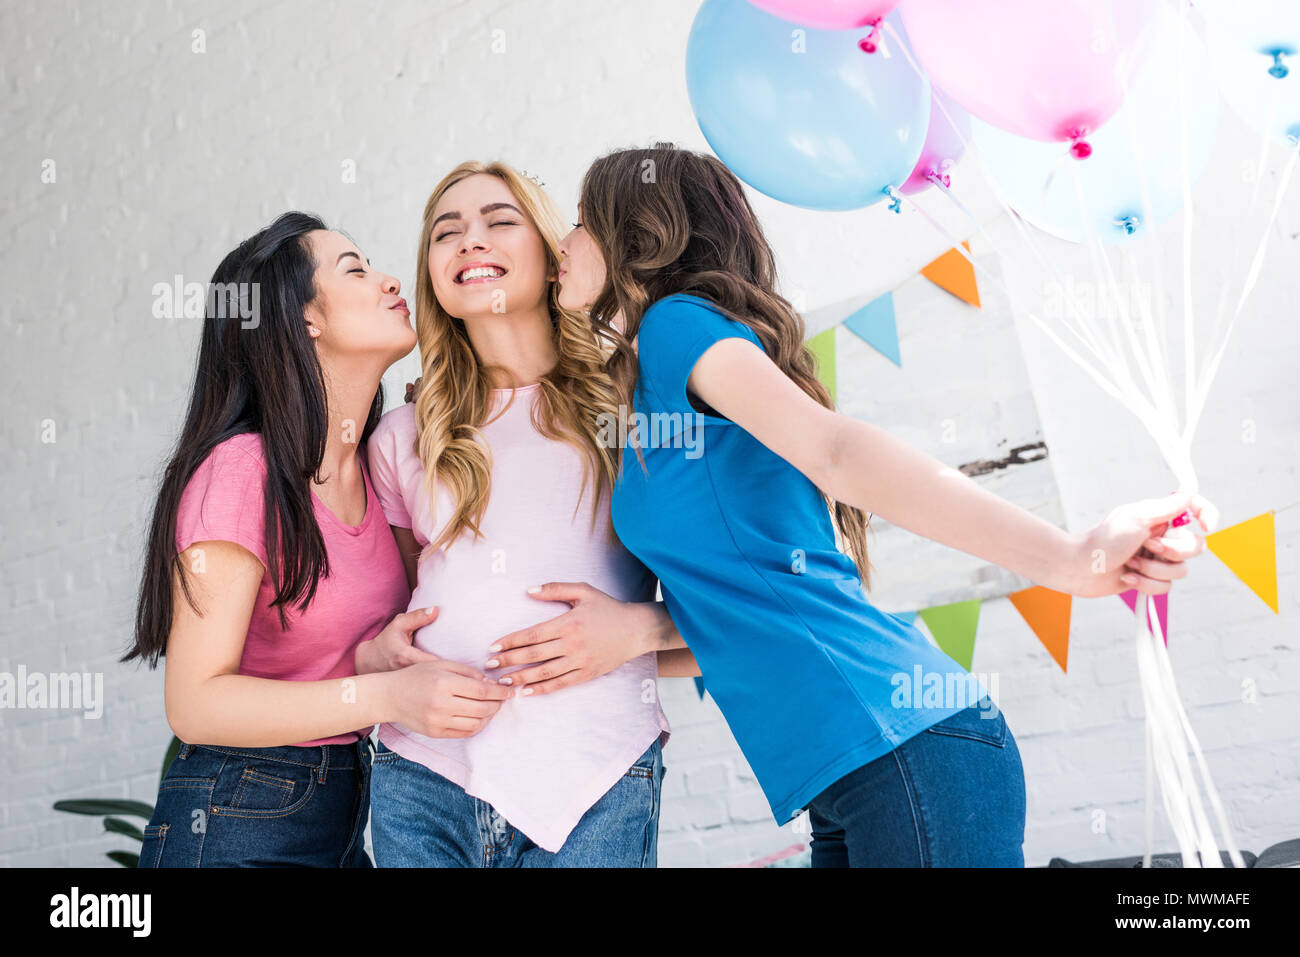 multicultural friends kissing smiling pregnant woman at baby-party Stock Photo